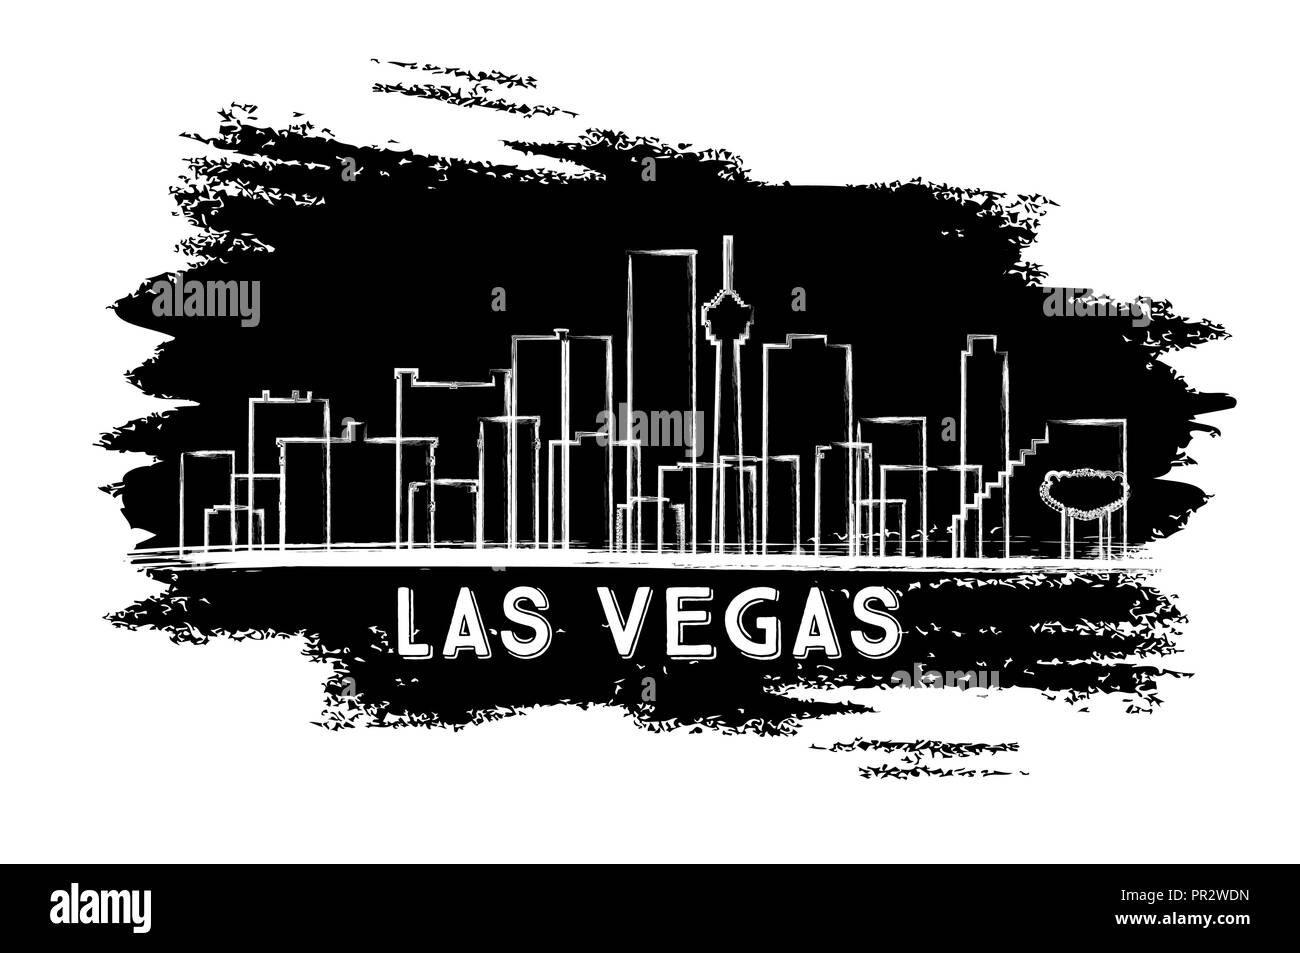 Las Vegas Nevada City Skyline Silhouette. Hand Drawn Sketch. Vector Illustration. Business Travel and Tourism Concept with Modern Architecture. Stock Vector